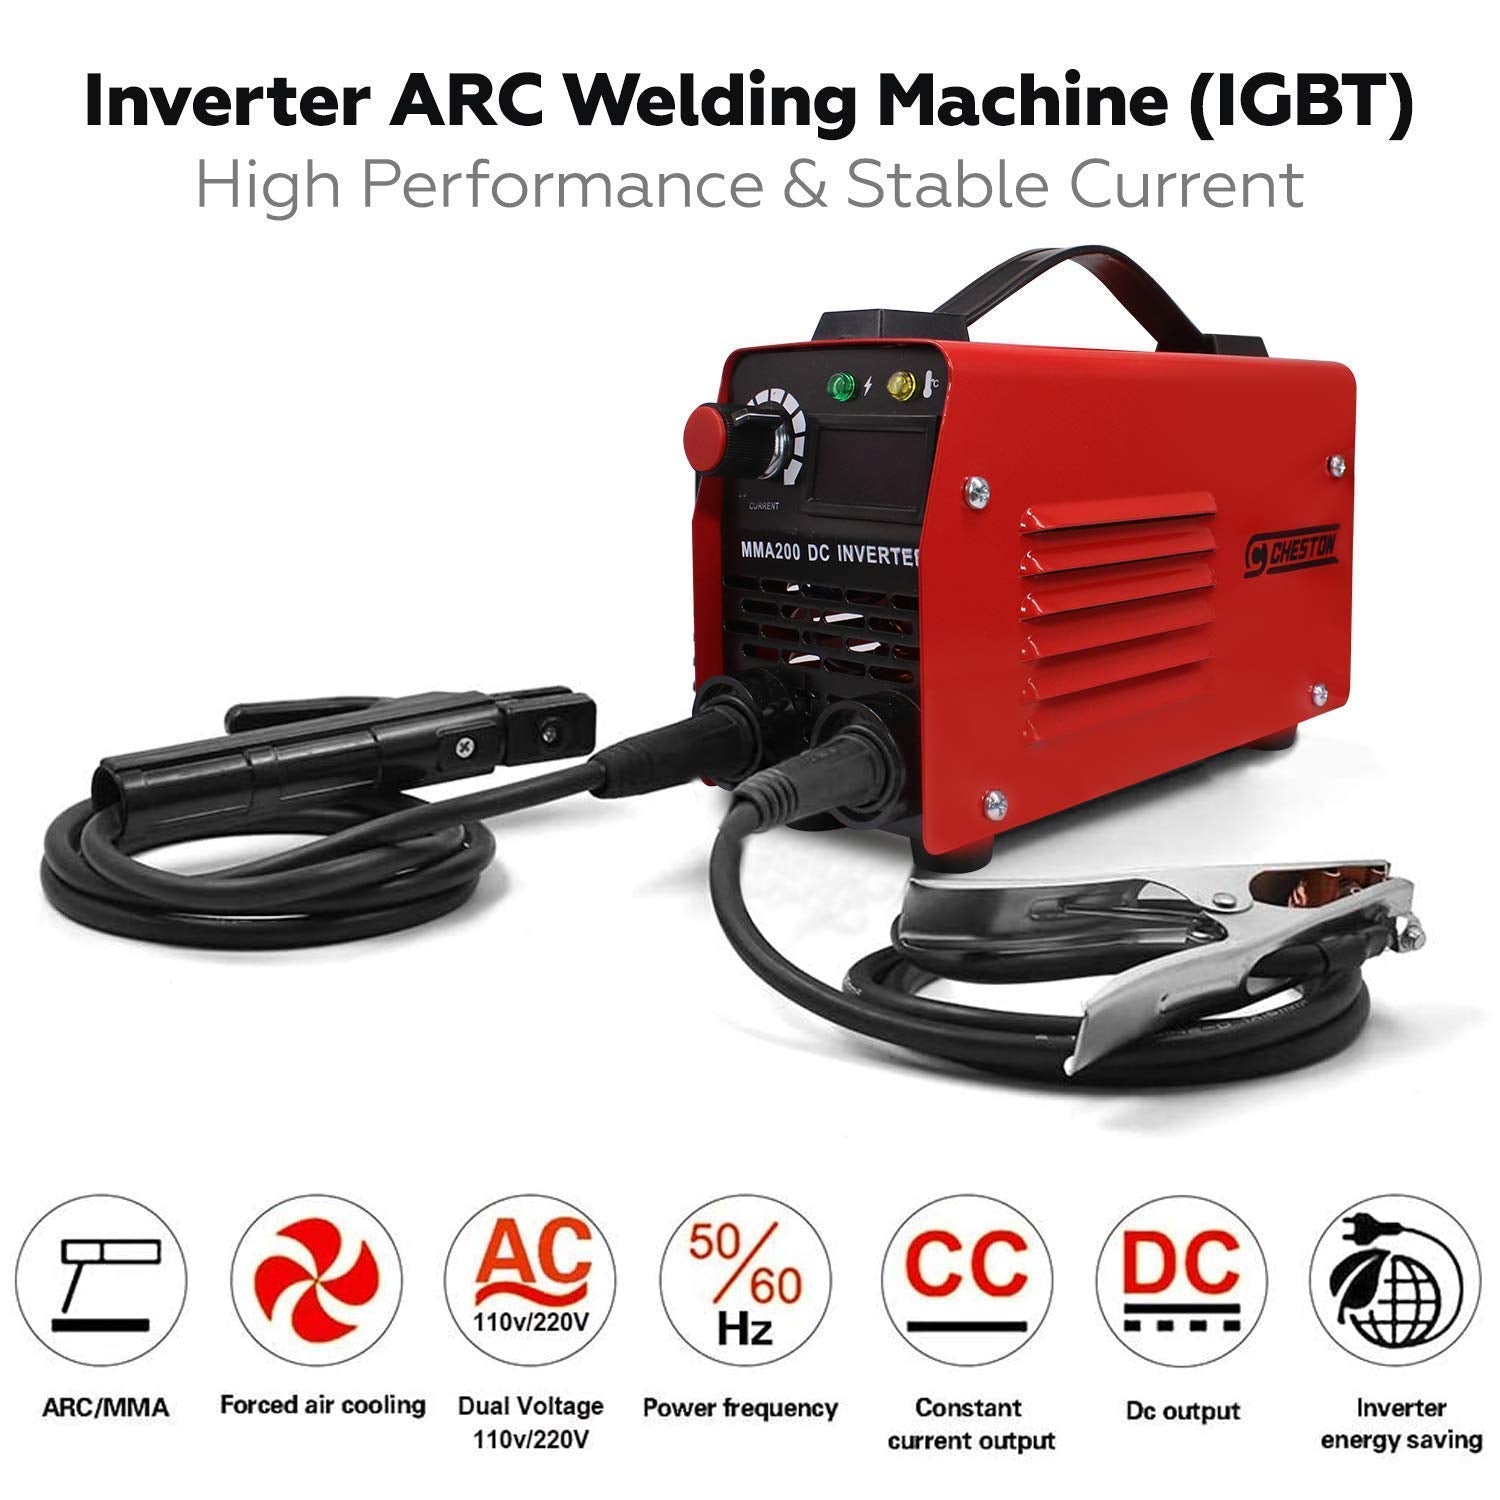 Cheston 200A Portable Inverter ARC/MMA Compact Welding Machine with IGBT | with Accessories Mask (Welding Machine + Rotary Hammer)